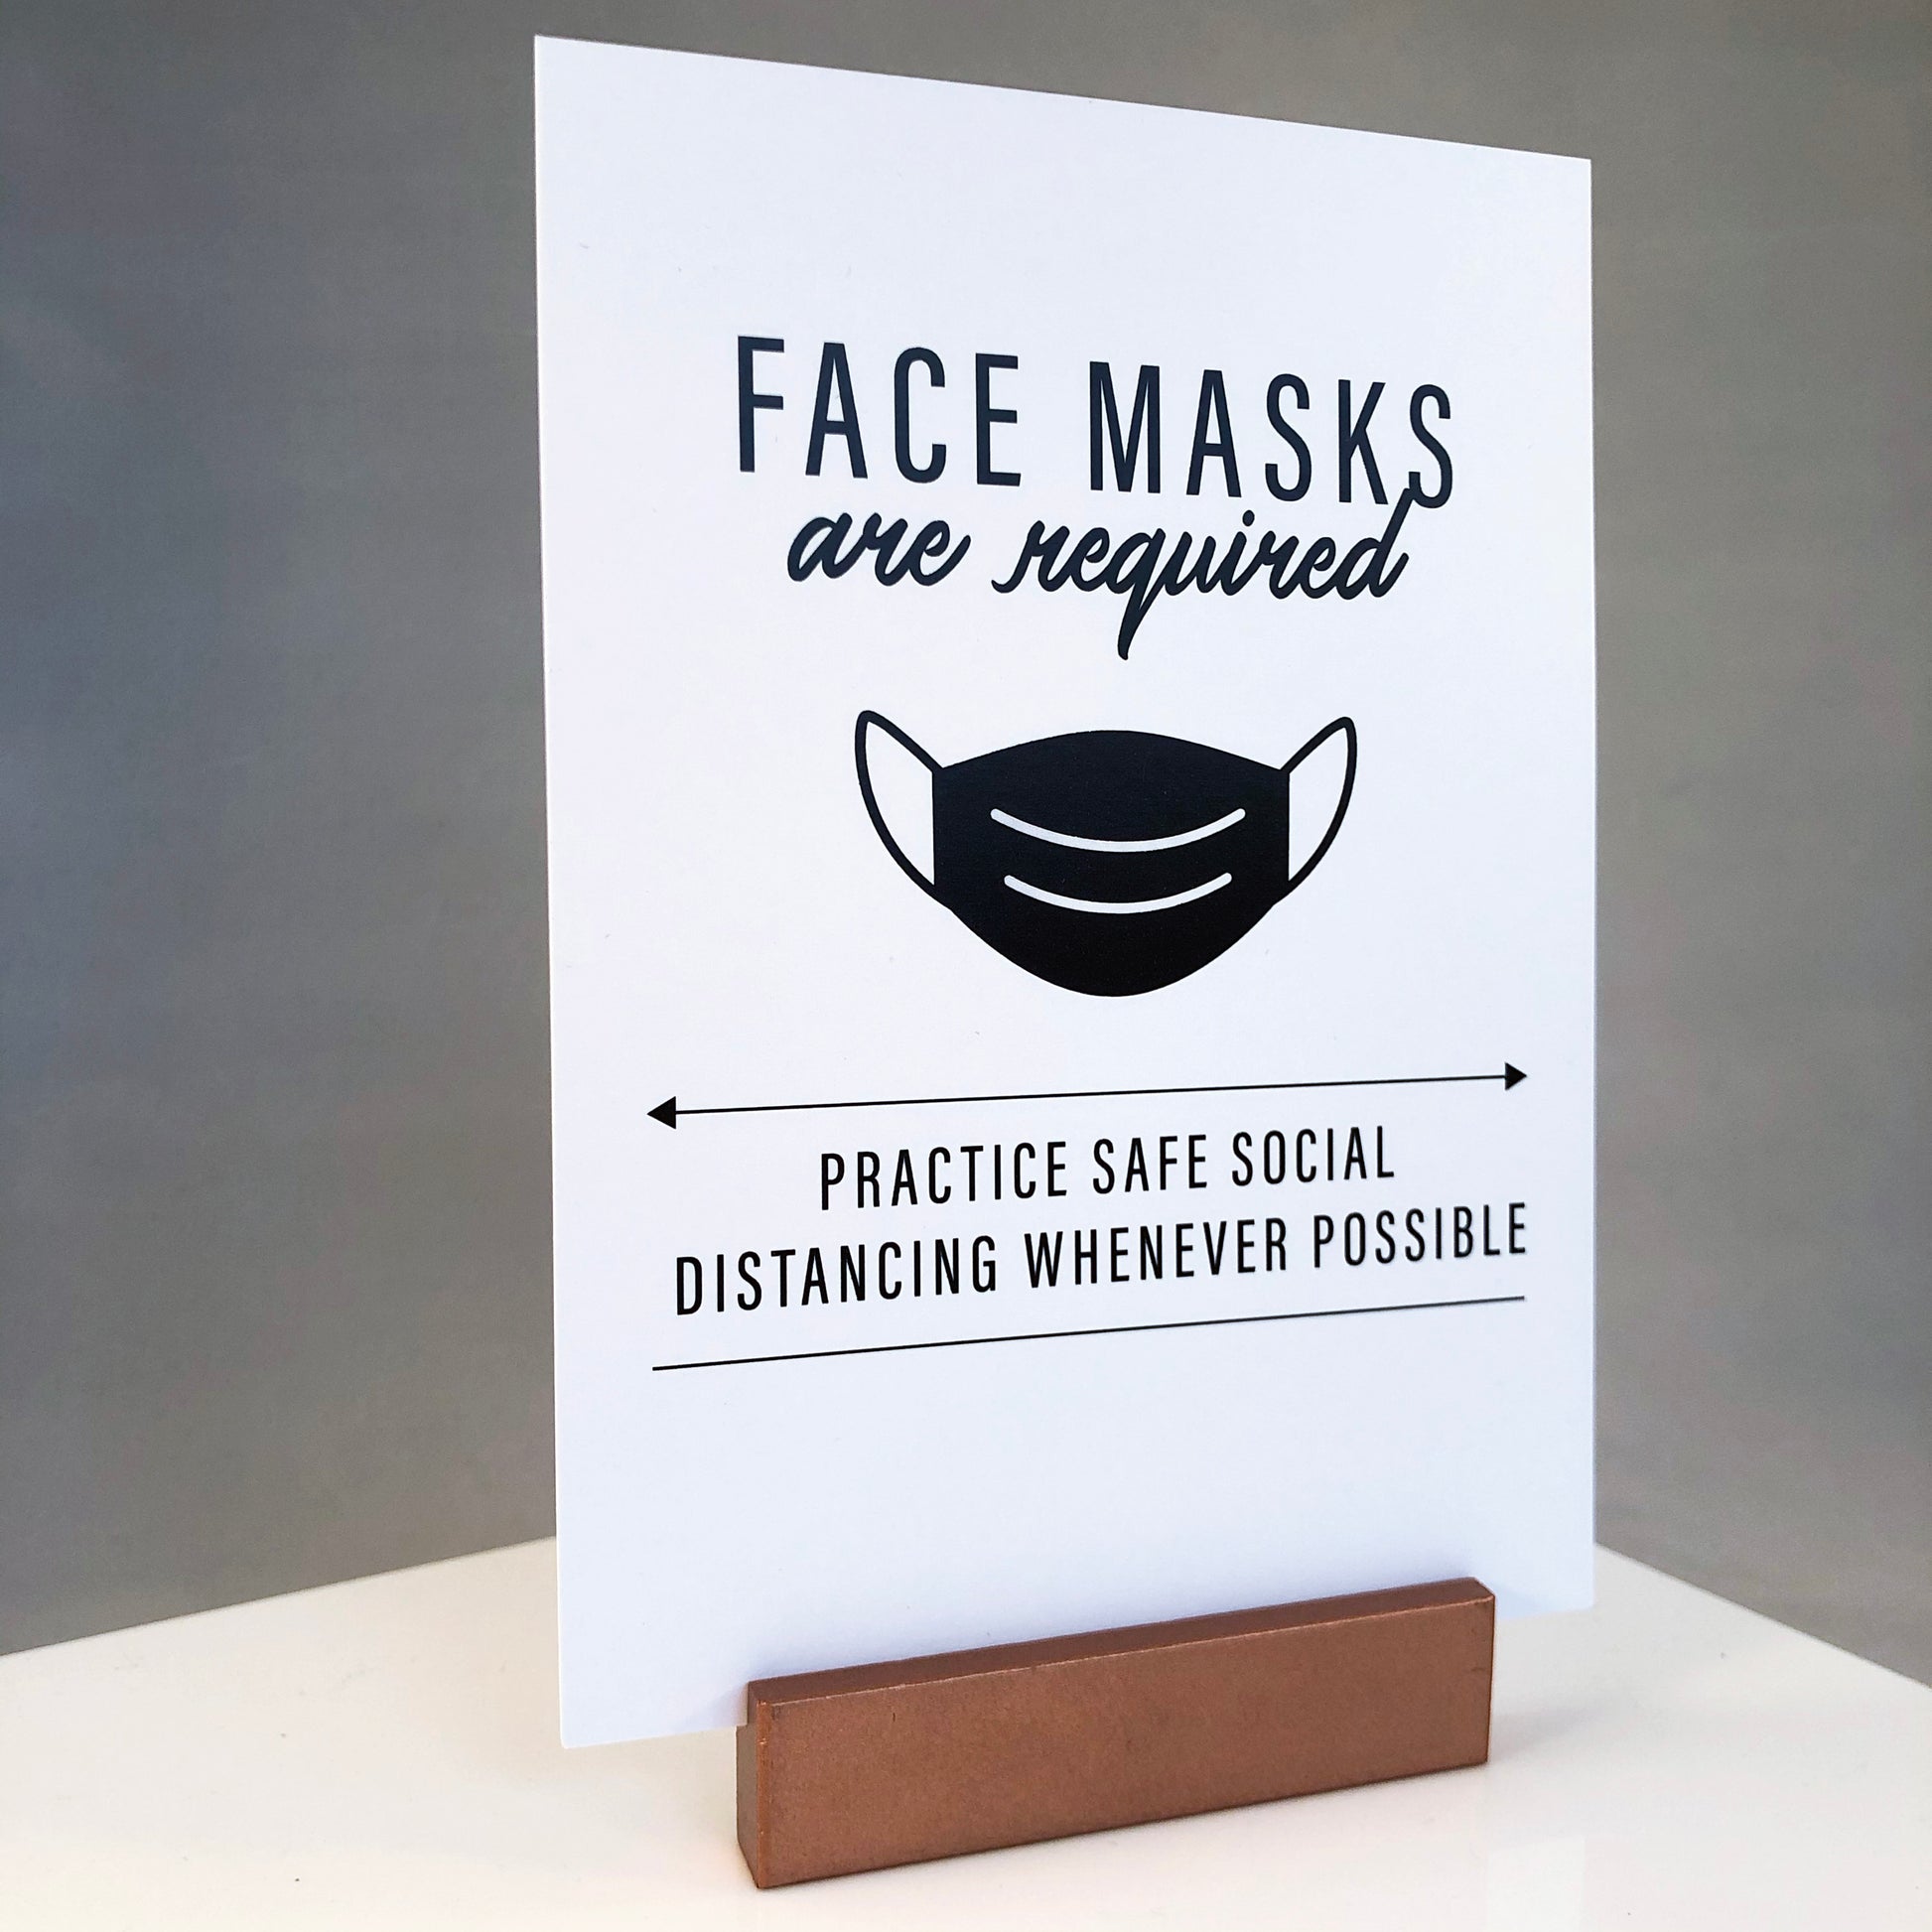 Face masks are required. Practice safe social distancing whenever possible.